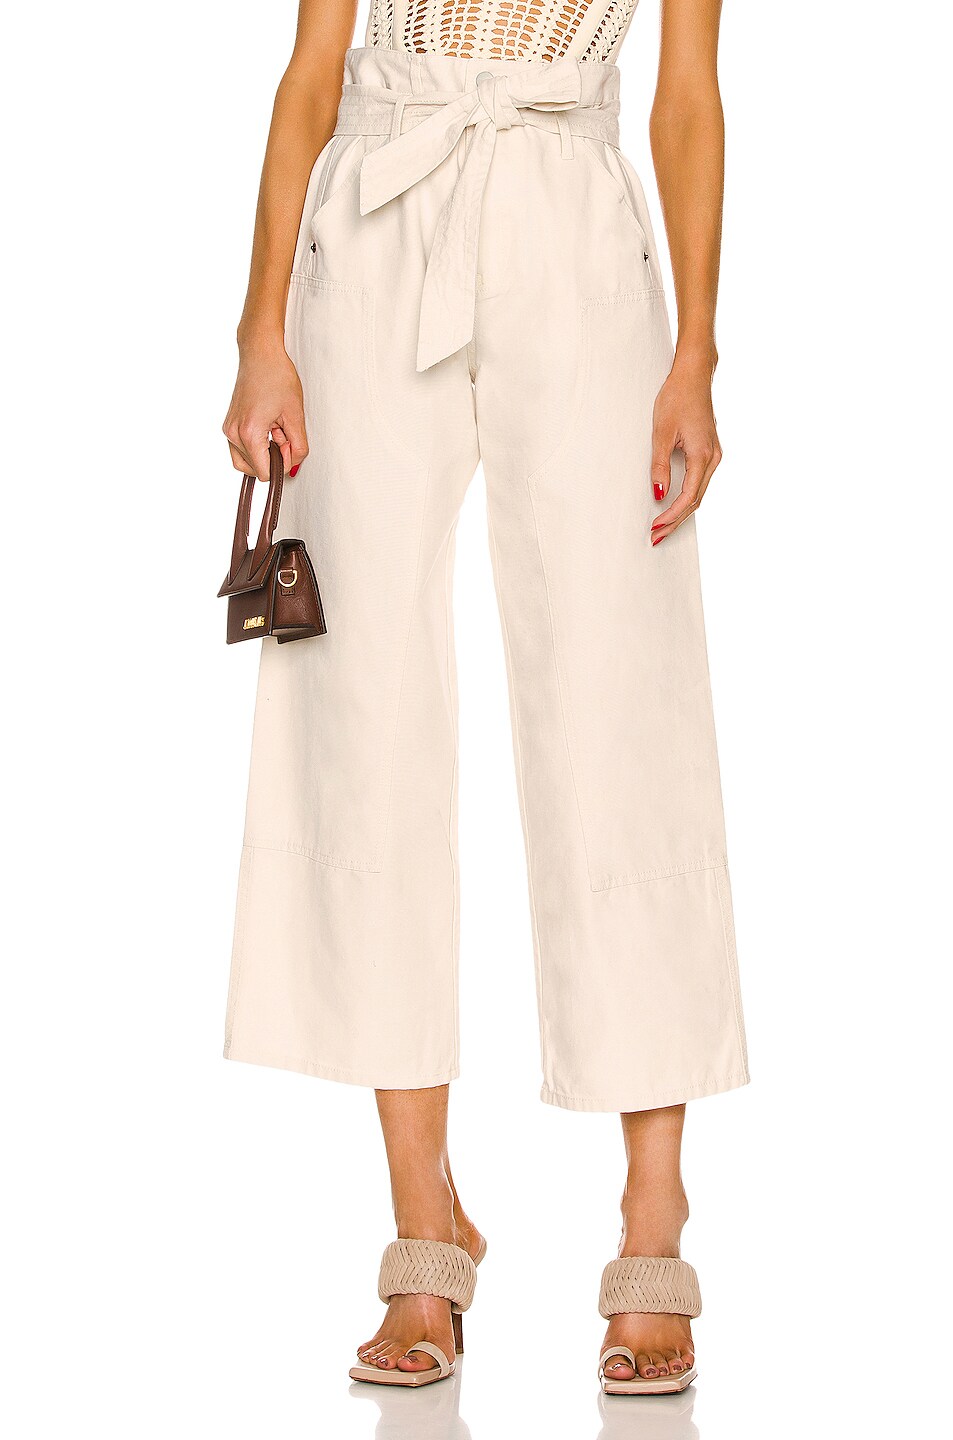 Image 1 of Marissa Webb Bo Paper Bag Canvas Patched Boyfriend Pant in Oat